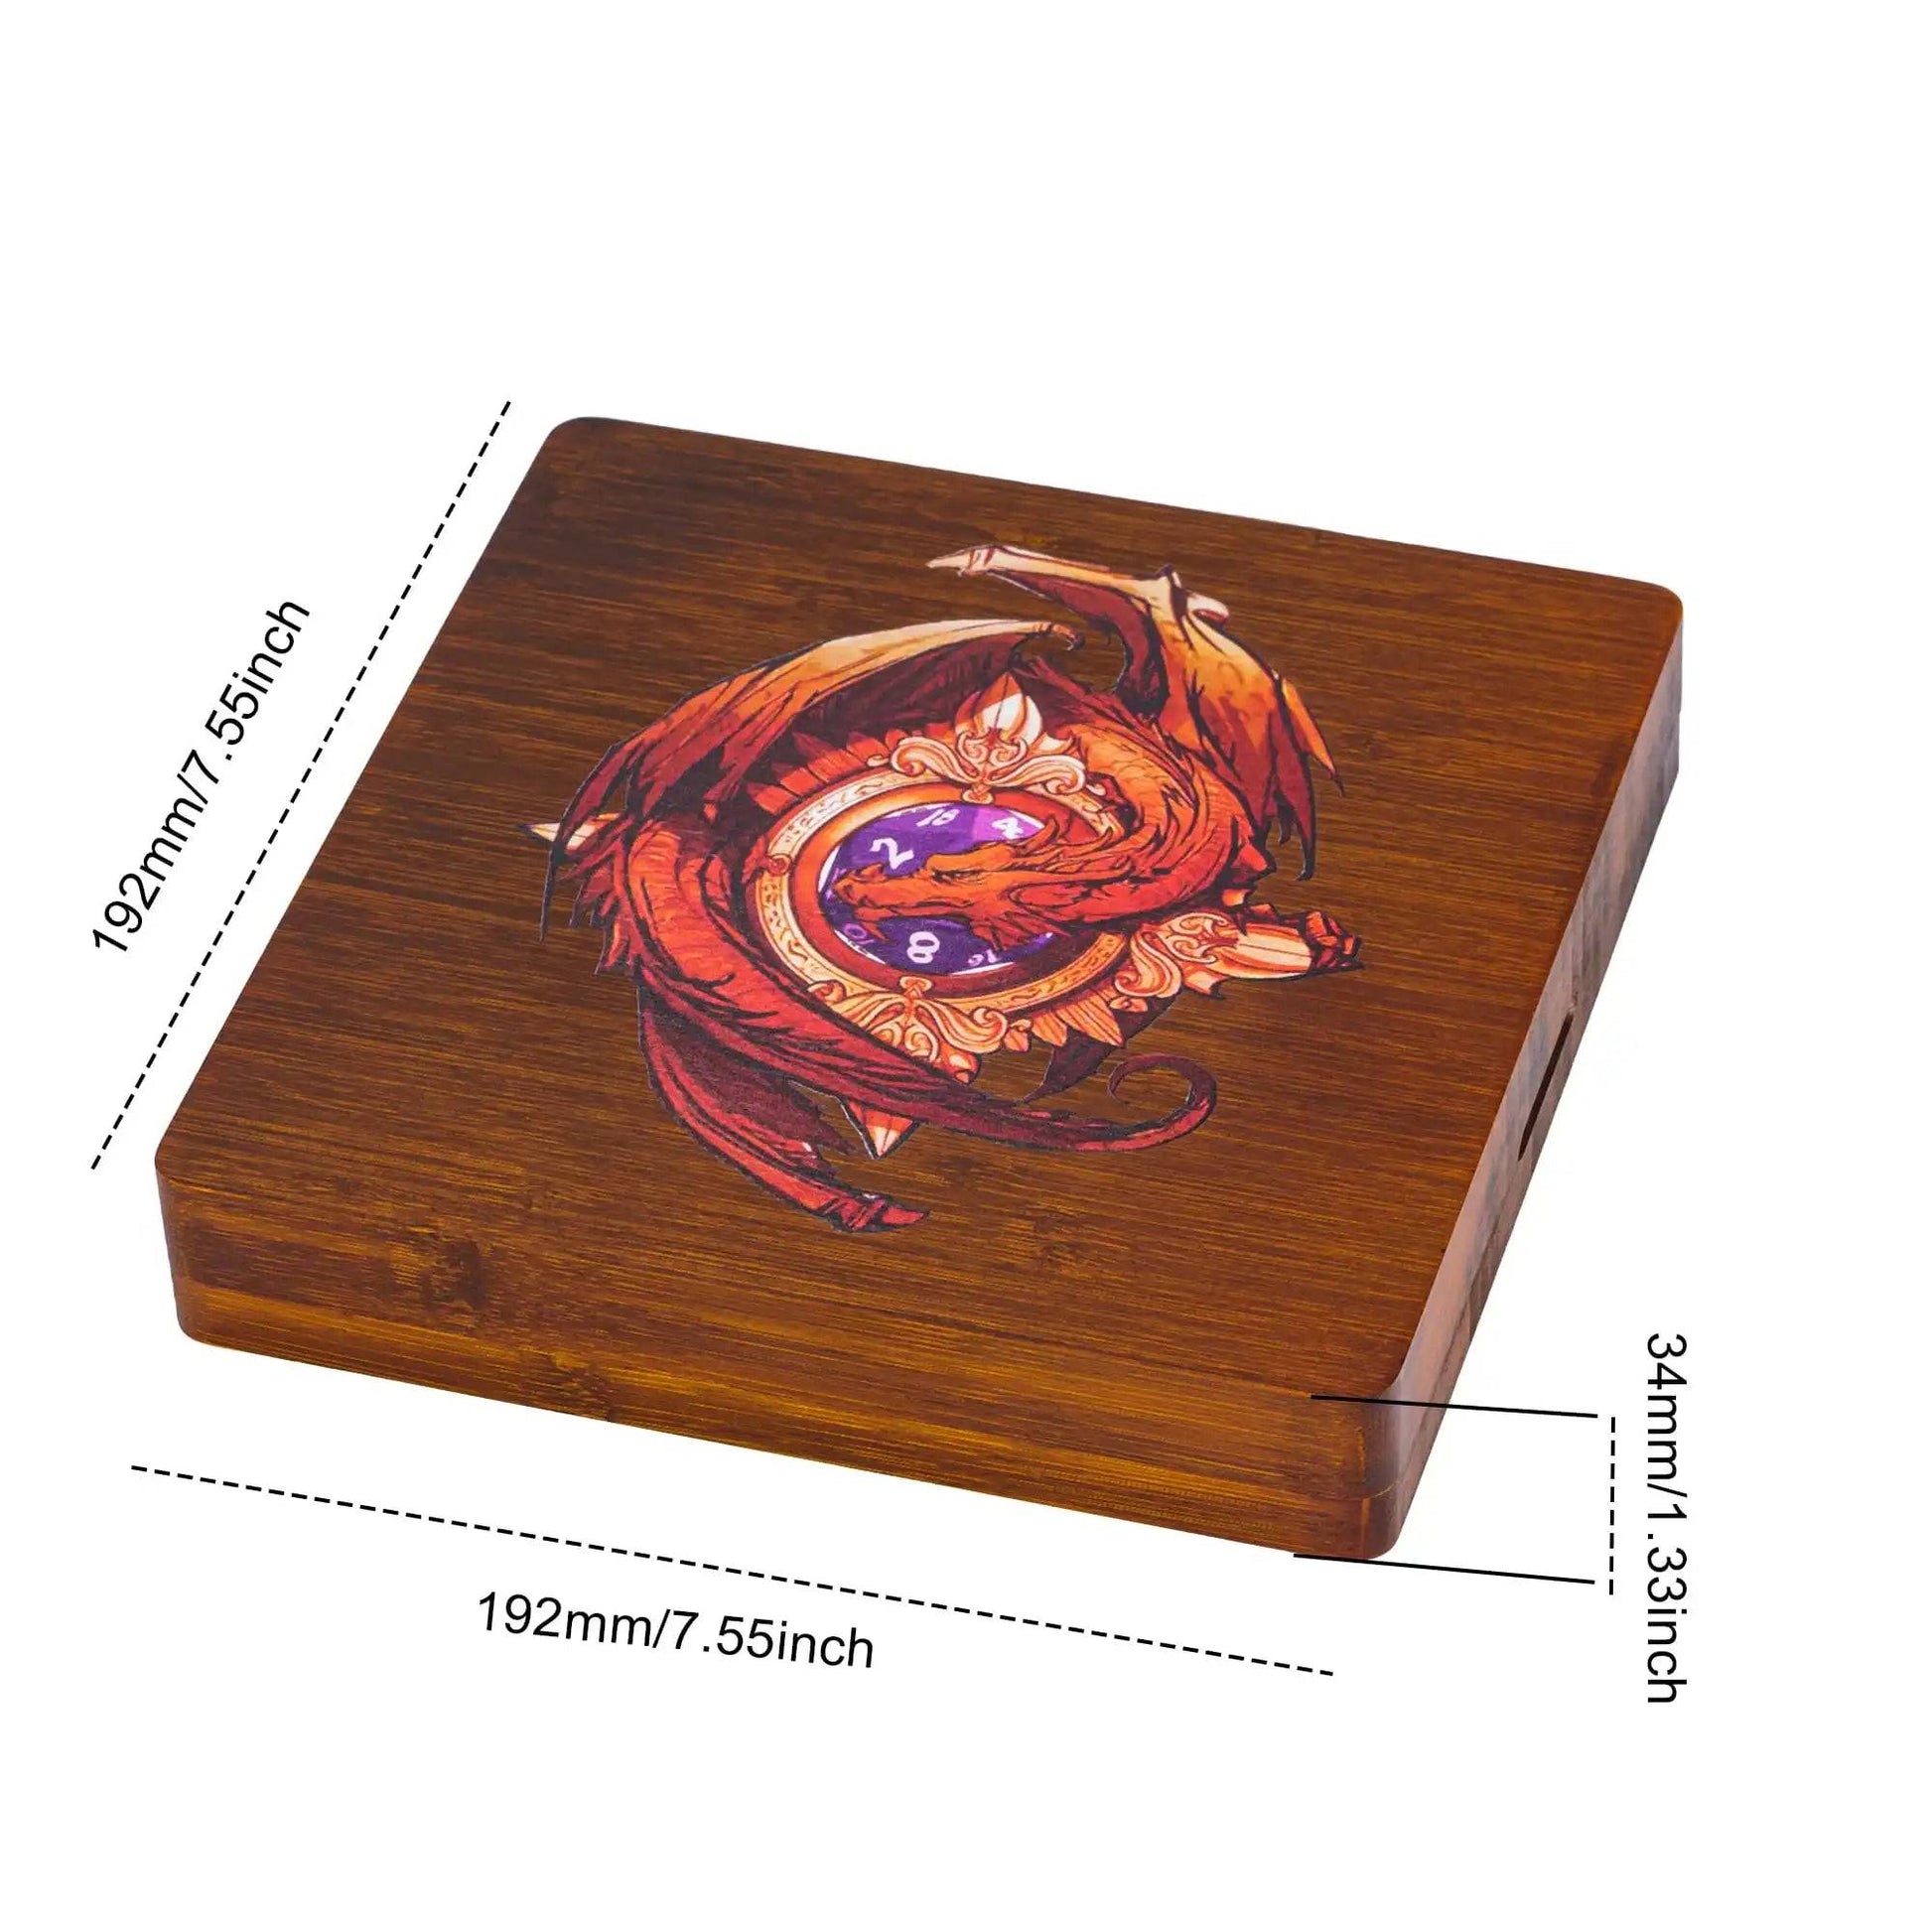 2 in 1 Wooden Dice Case & Dice Tray, High Quality New Square Bamboo Dice Holder for Dice Set, D&D, RPG, Tabletop Games